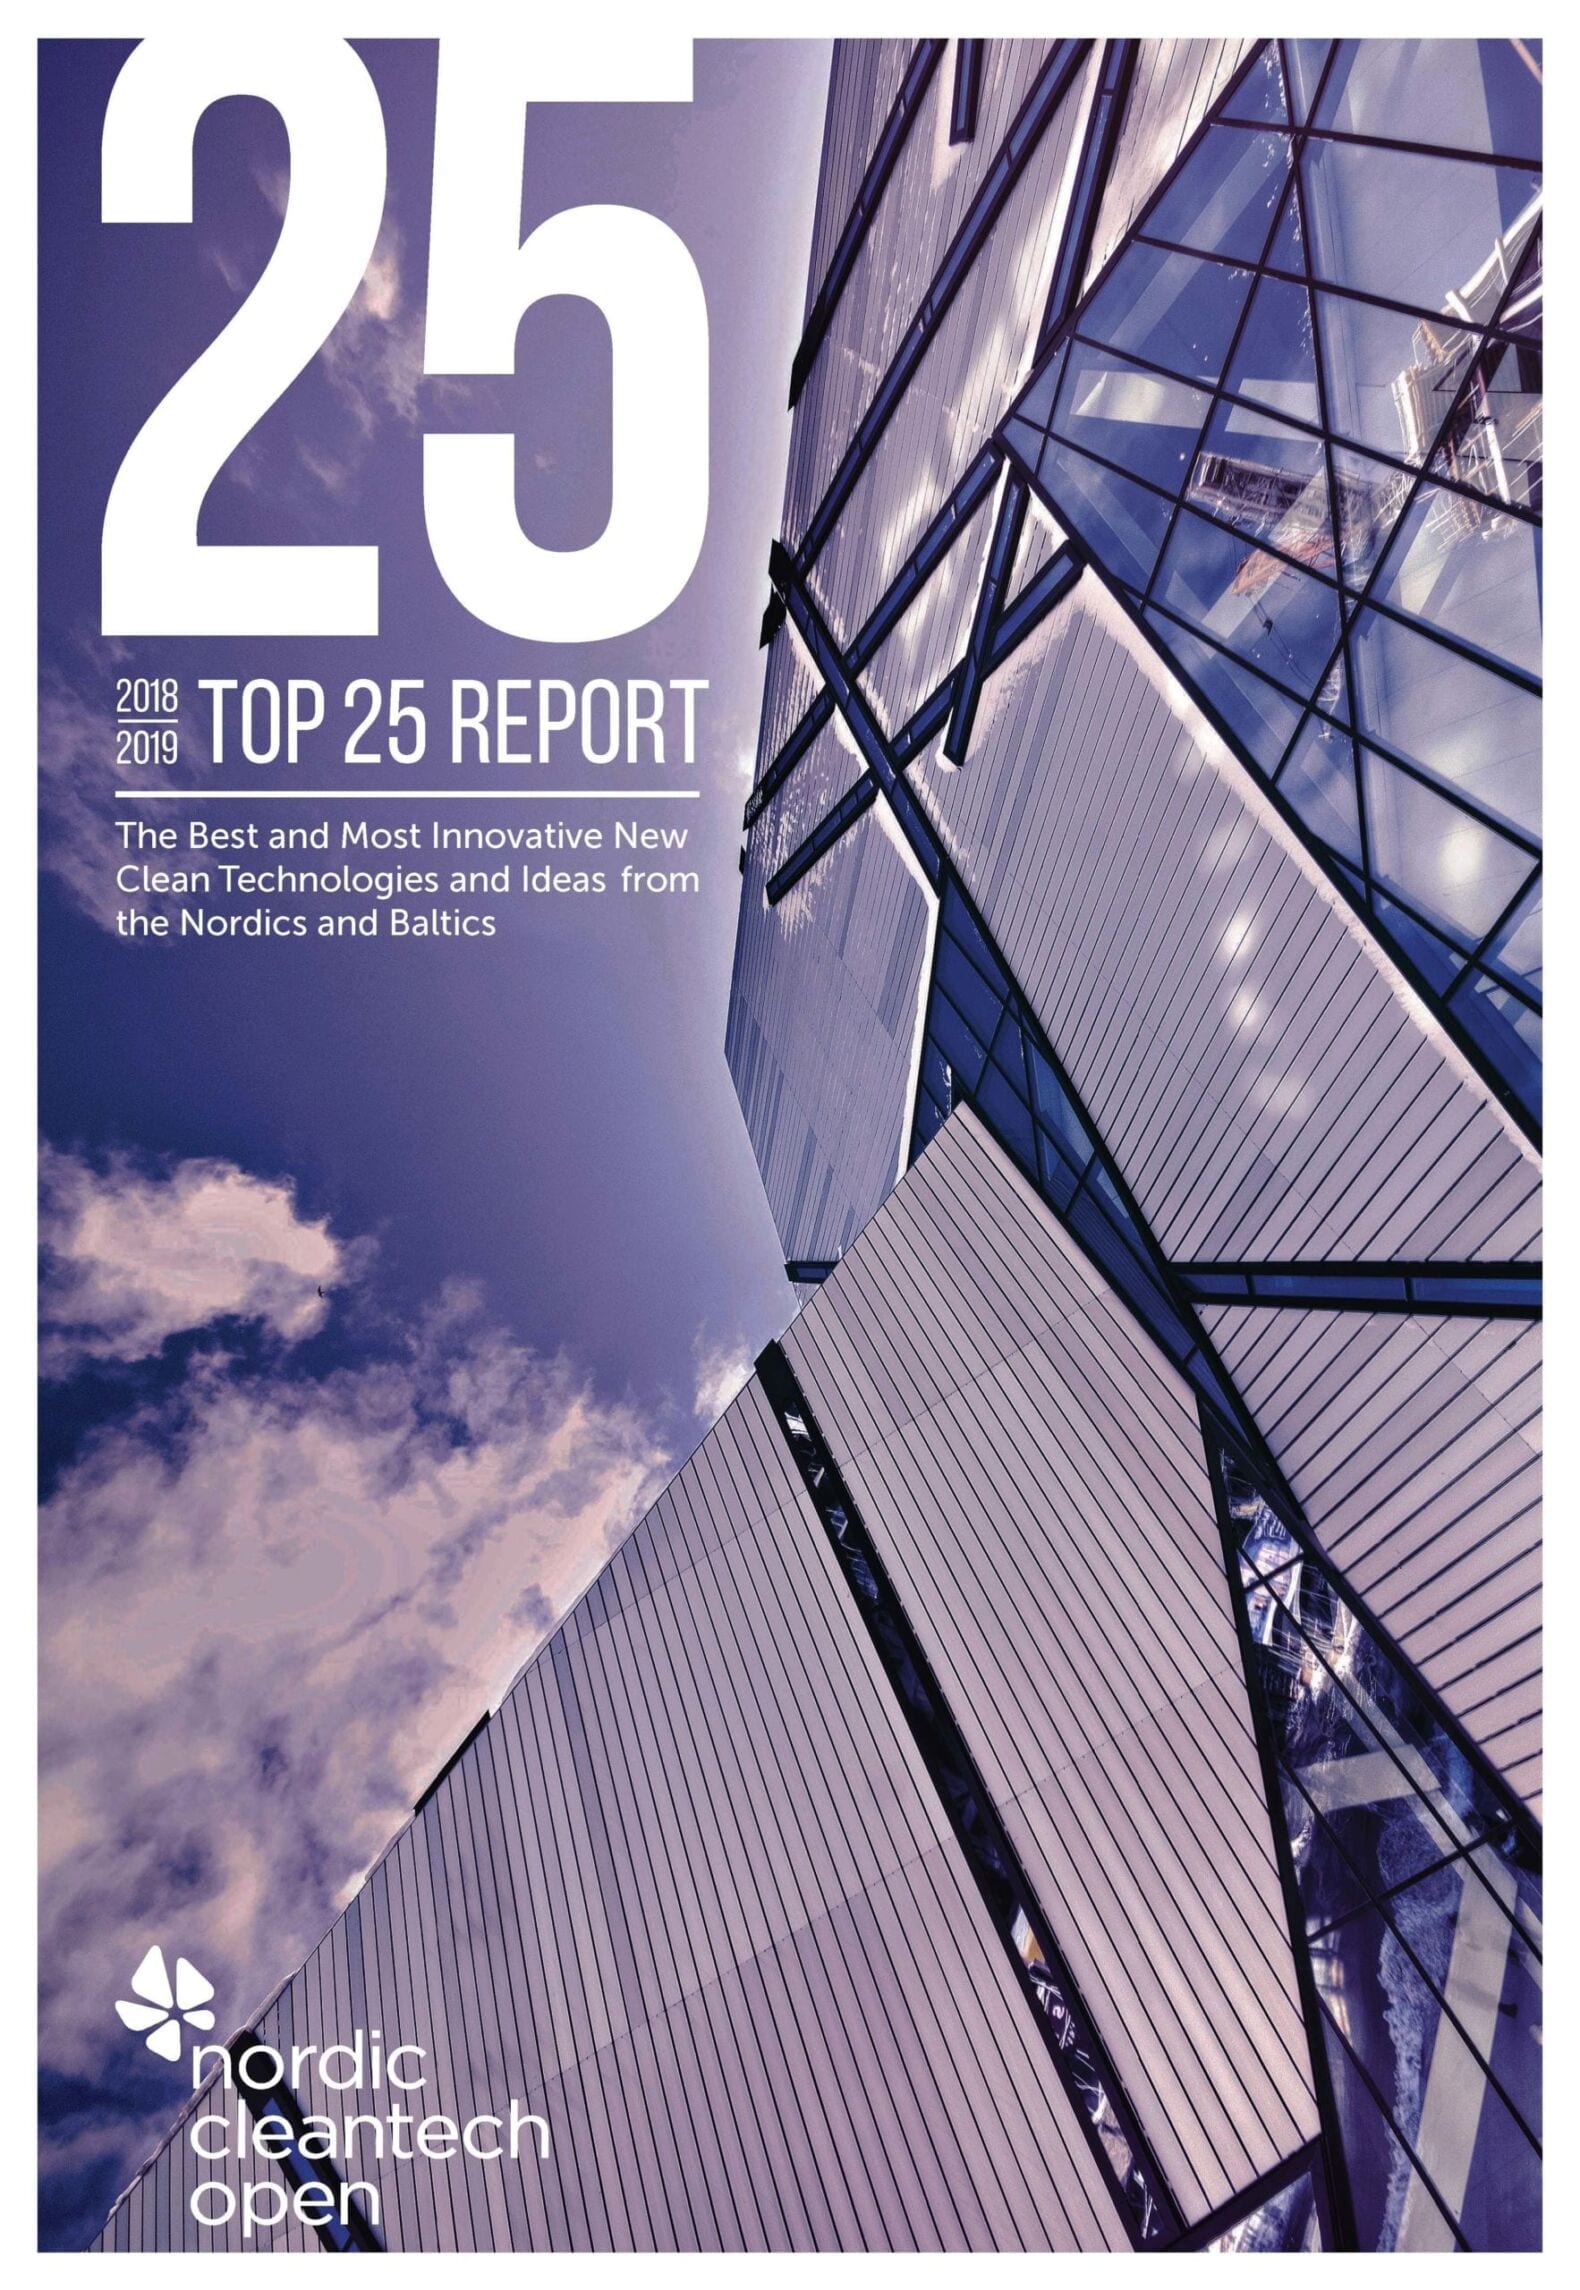 Top 25 Report - Cycle 2018/19